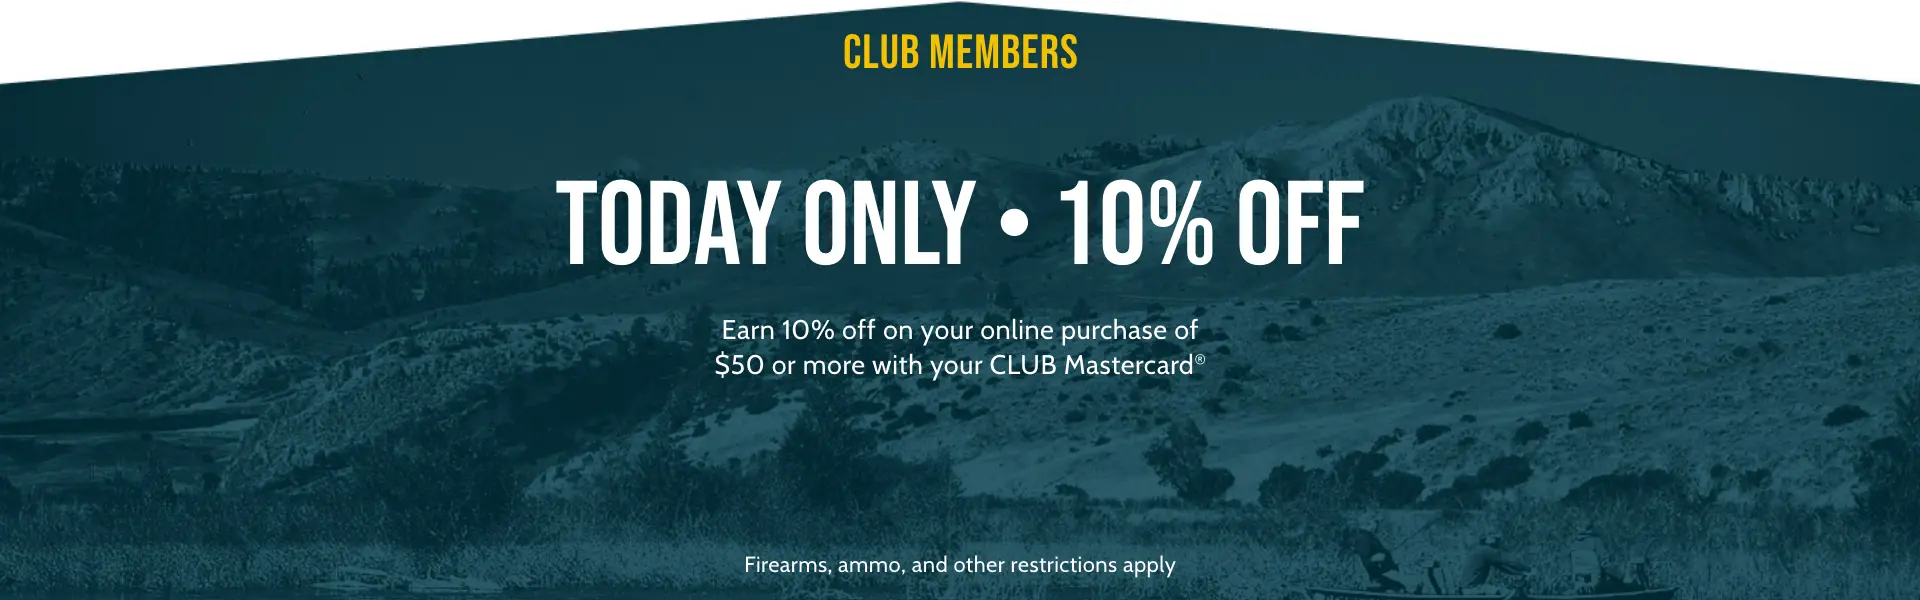 CLUB Members Today only - 10% off